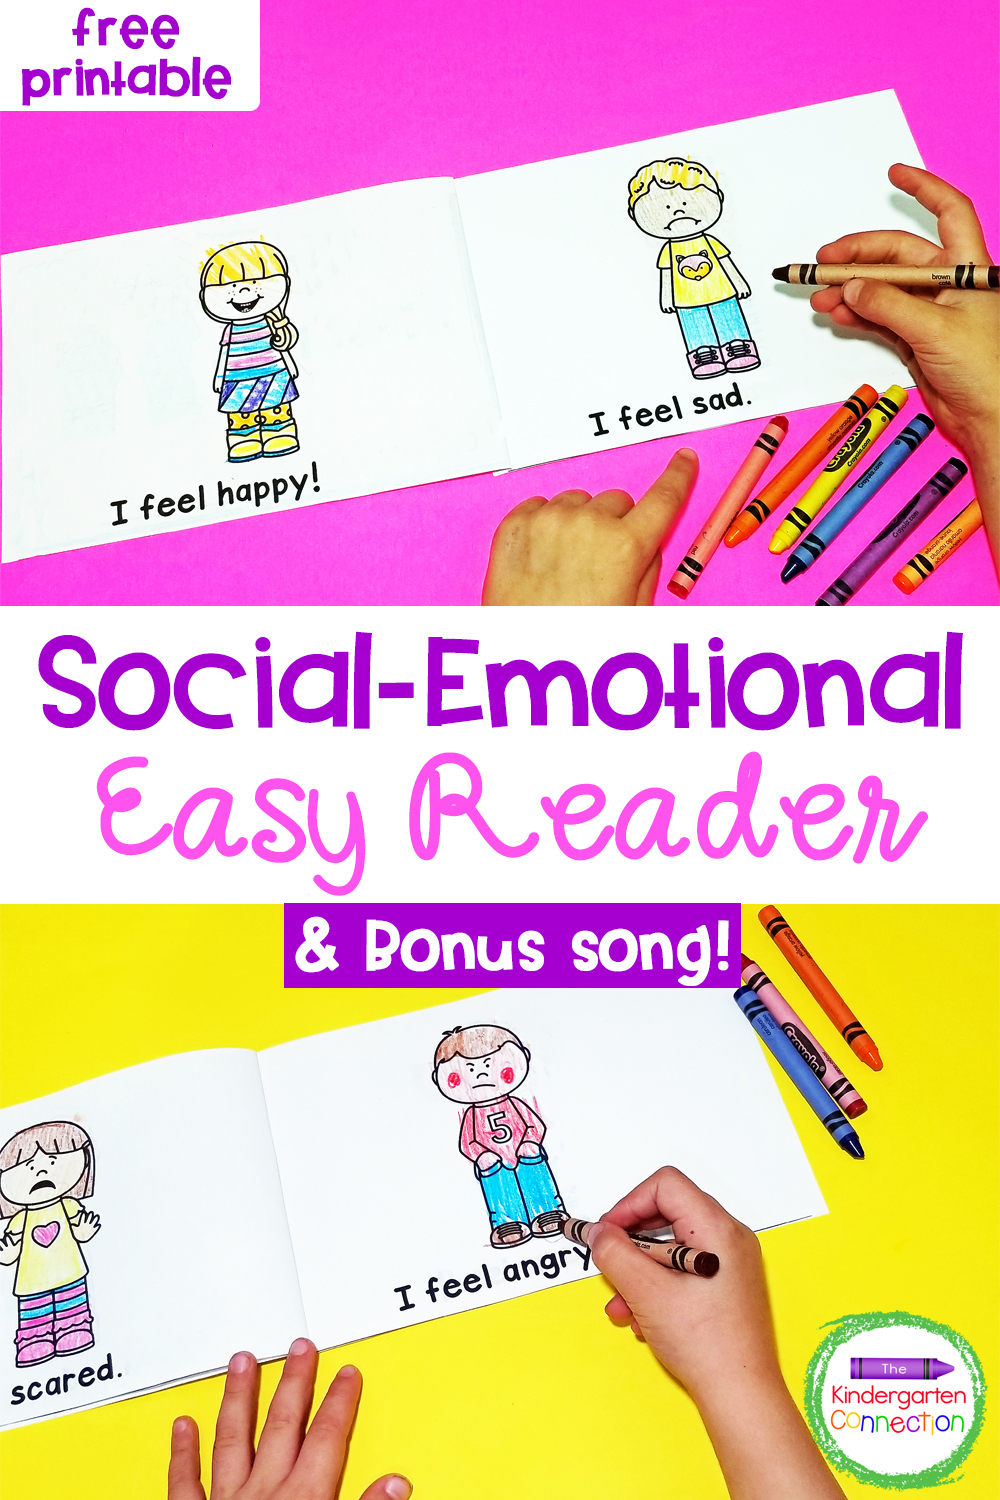 Grab this free Social-Emotional Emergent Reader to help your Pre-K and Kindergarten students learn to communicate their feelings and emotions!